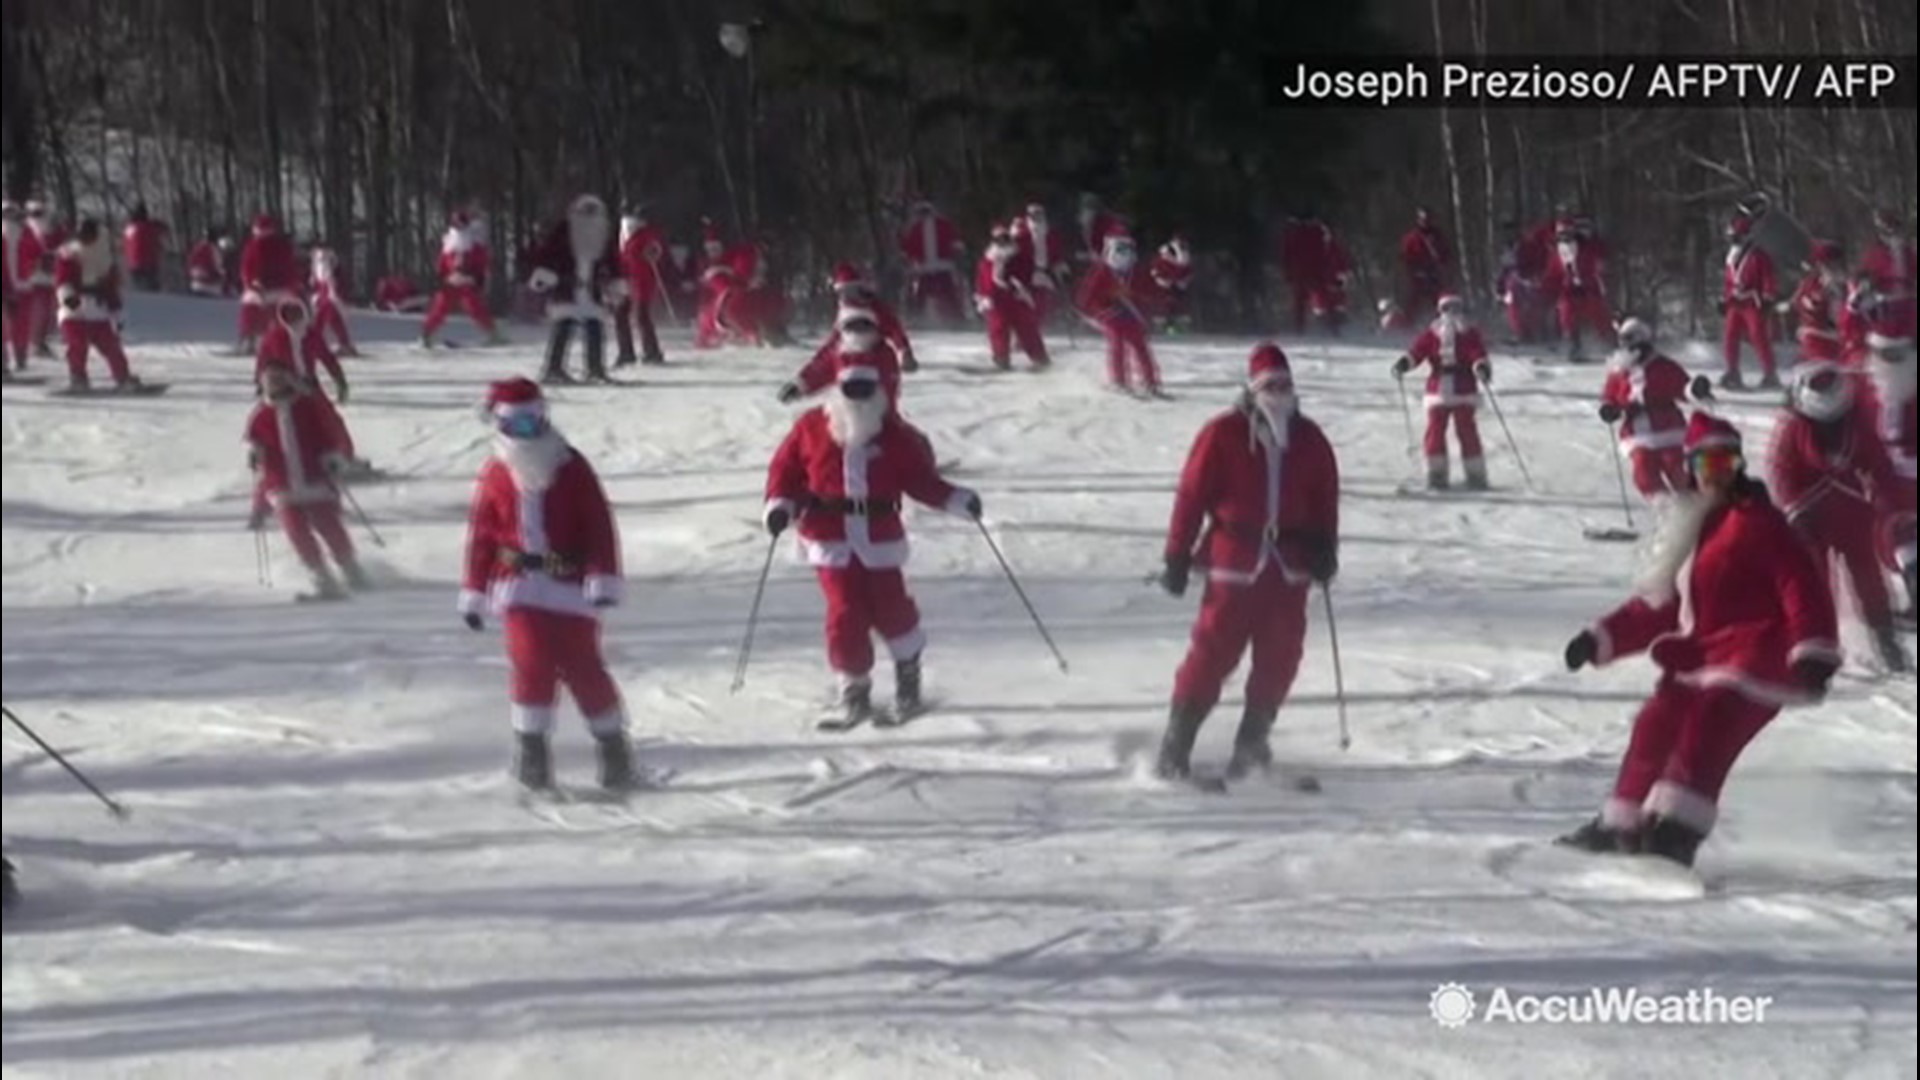 Hundreds of skiiers showed up to Sunday Resort in Newry, Maine, dressed up as Santa Claus to support the River Fund charity on Dec. 8.